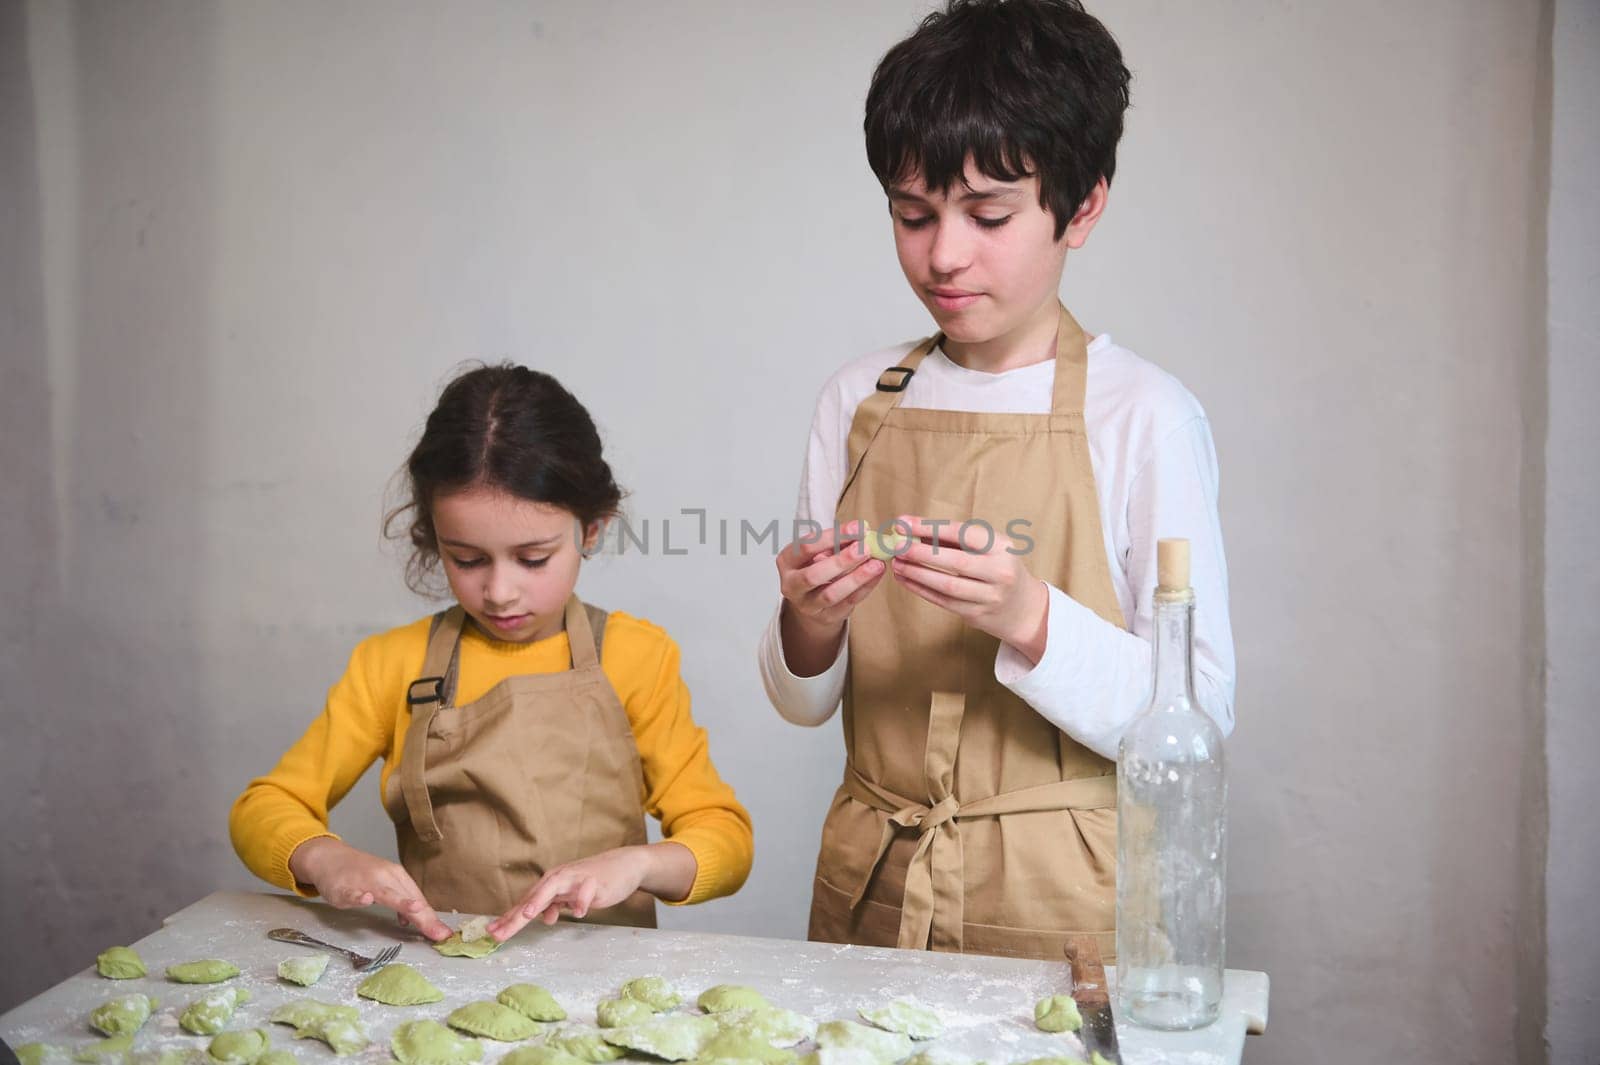 Cooking class for kids. Two diverse kids, a boy and a girl preparing family dinner, standing at floured kitchen table and modeling dumplings or Ukrainian varennyky in the rural house kitchen interior